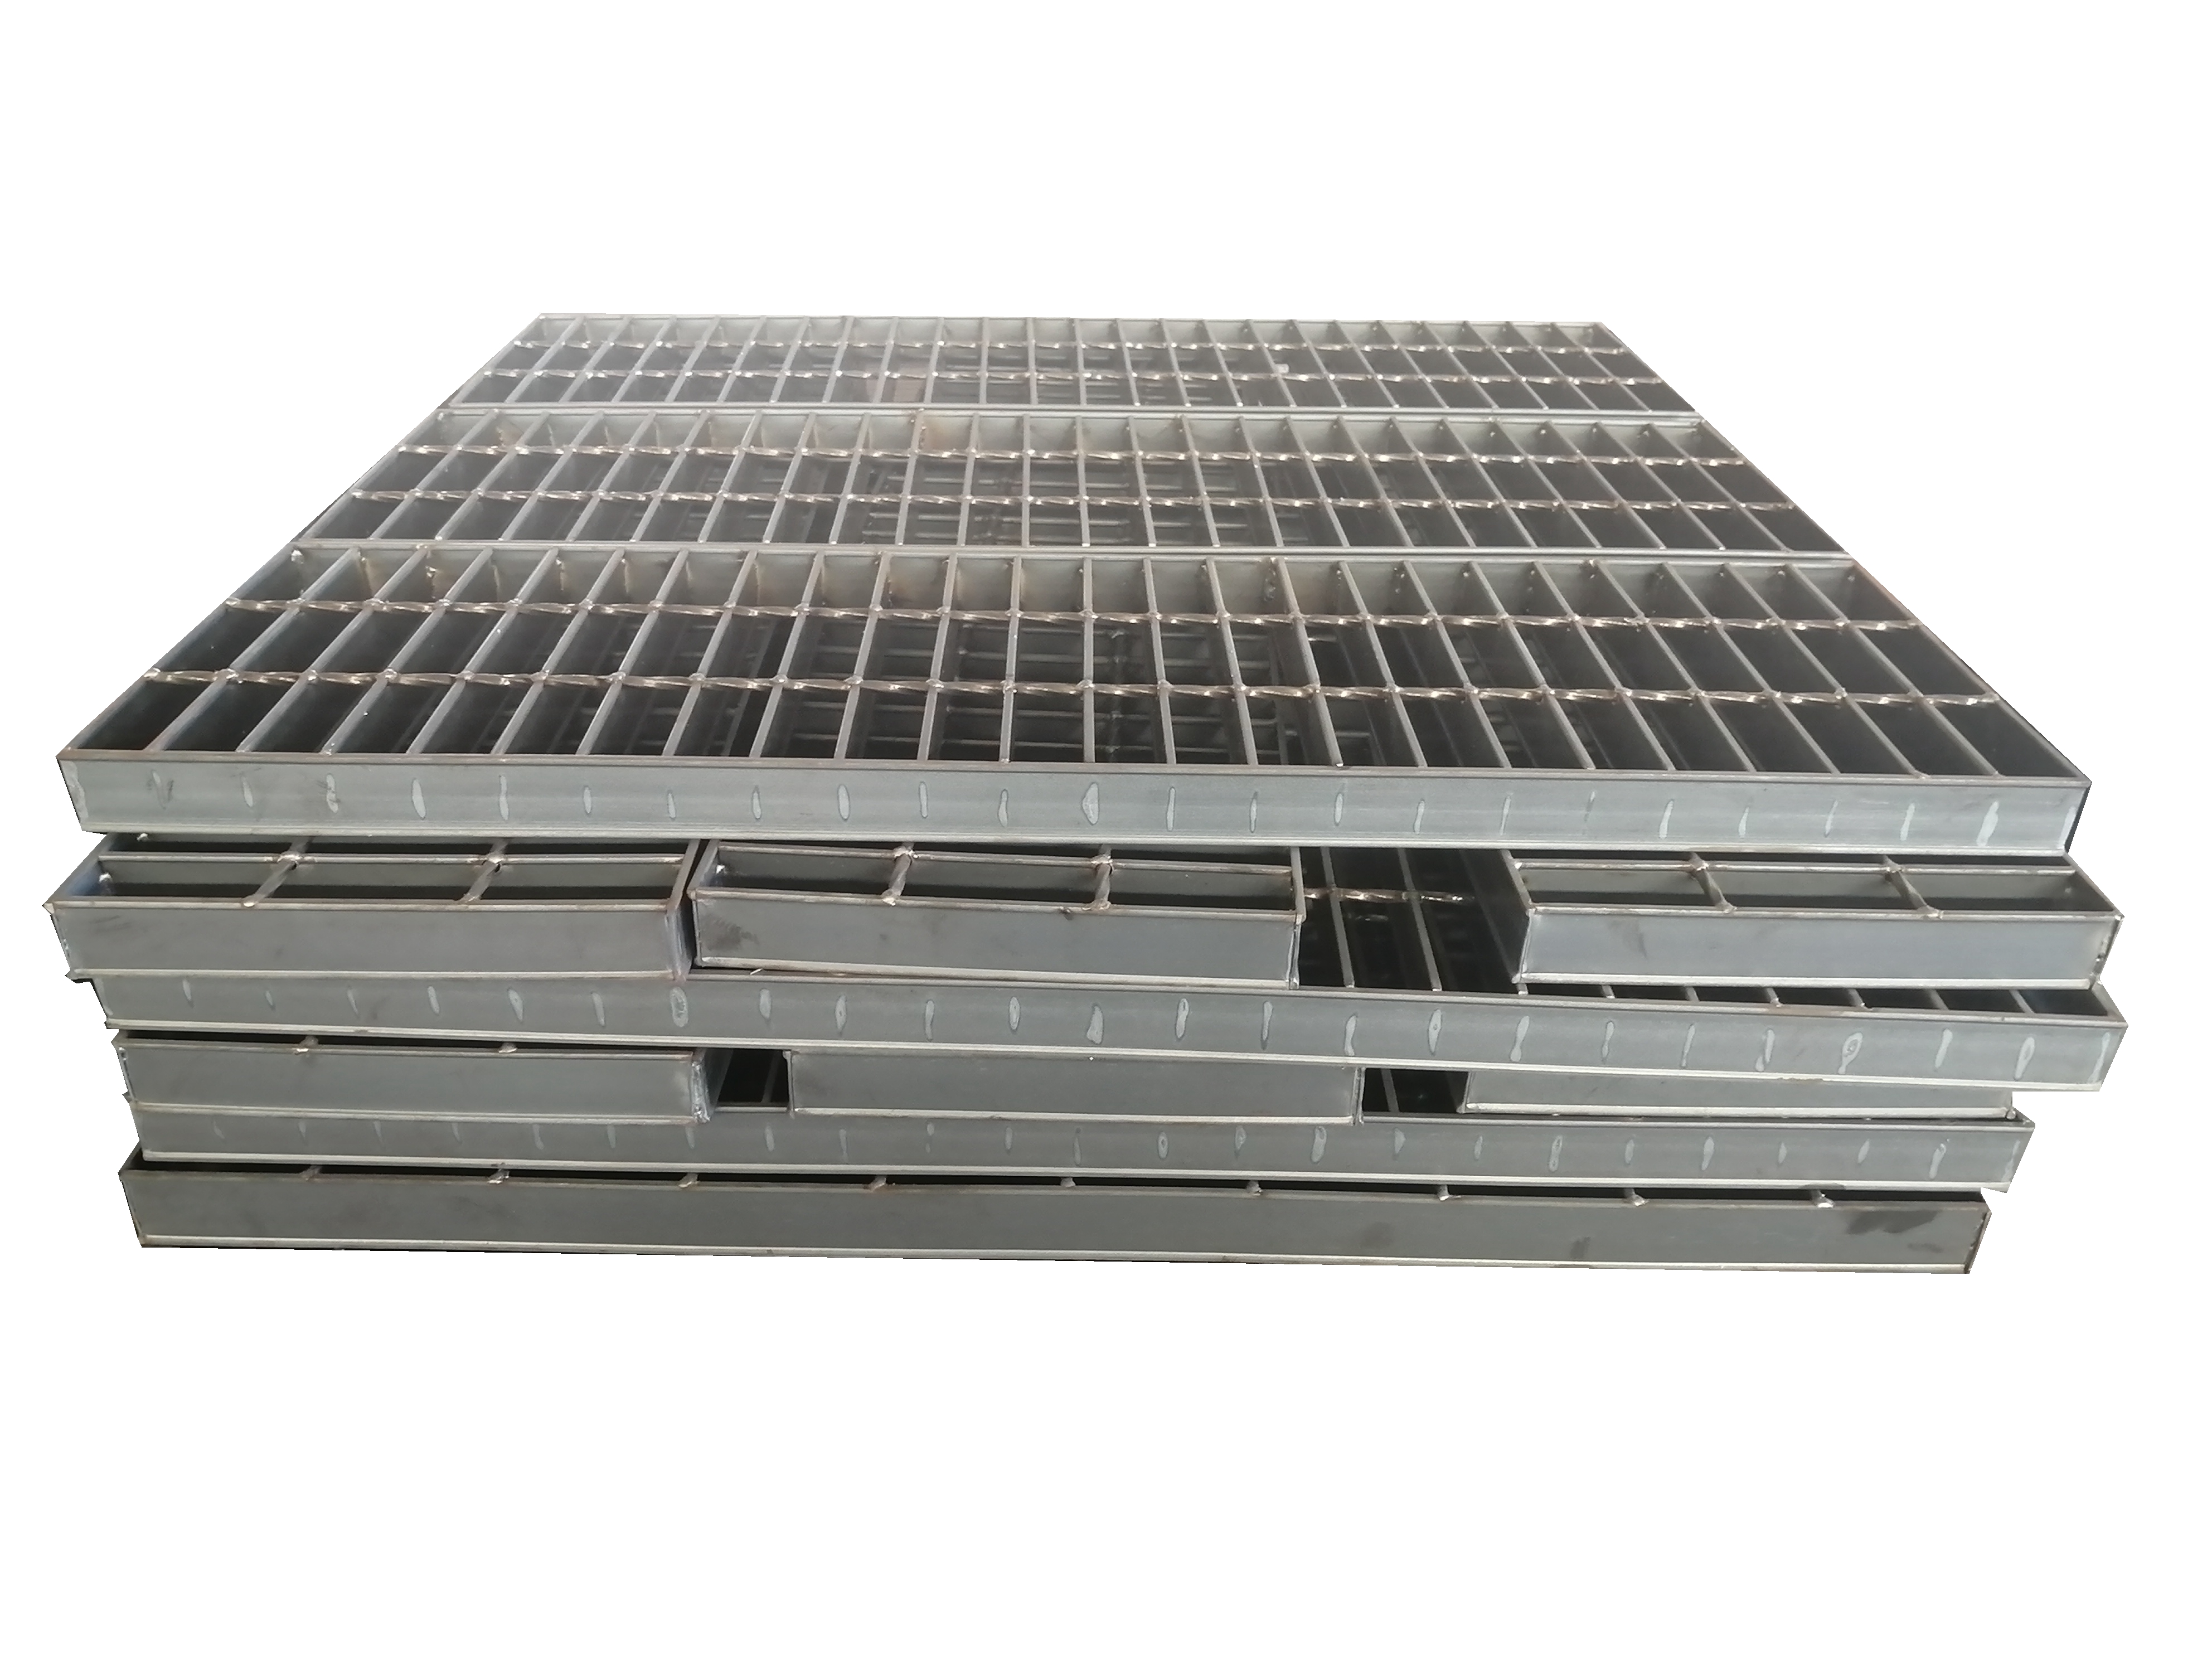 Low Price Morden Structural Plate I Style Metal Galvanized Supply Standard Stainless Steel Grating